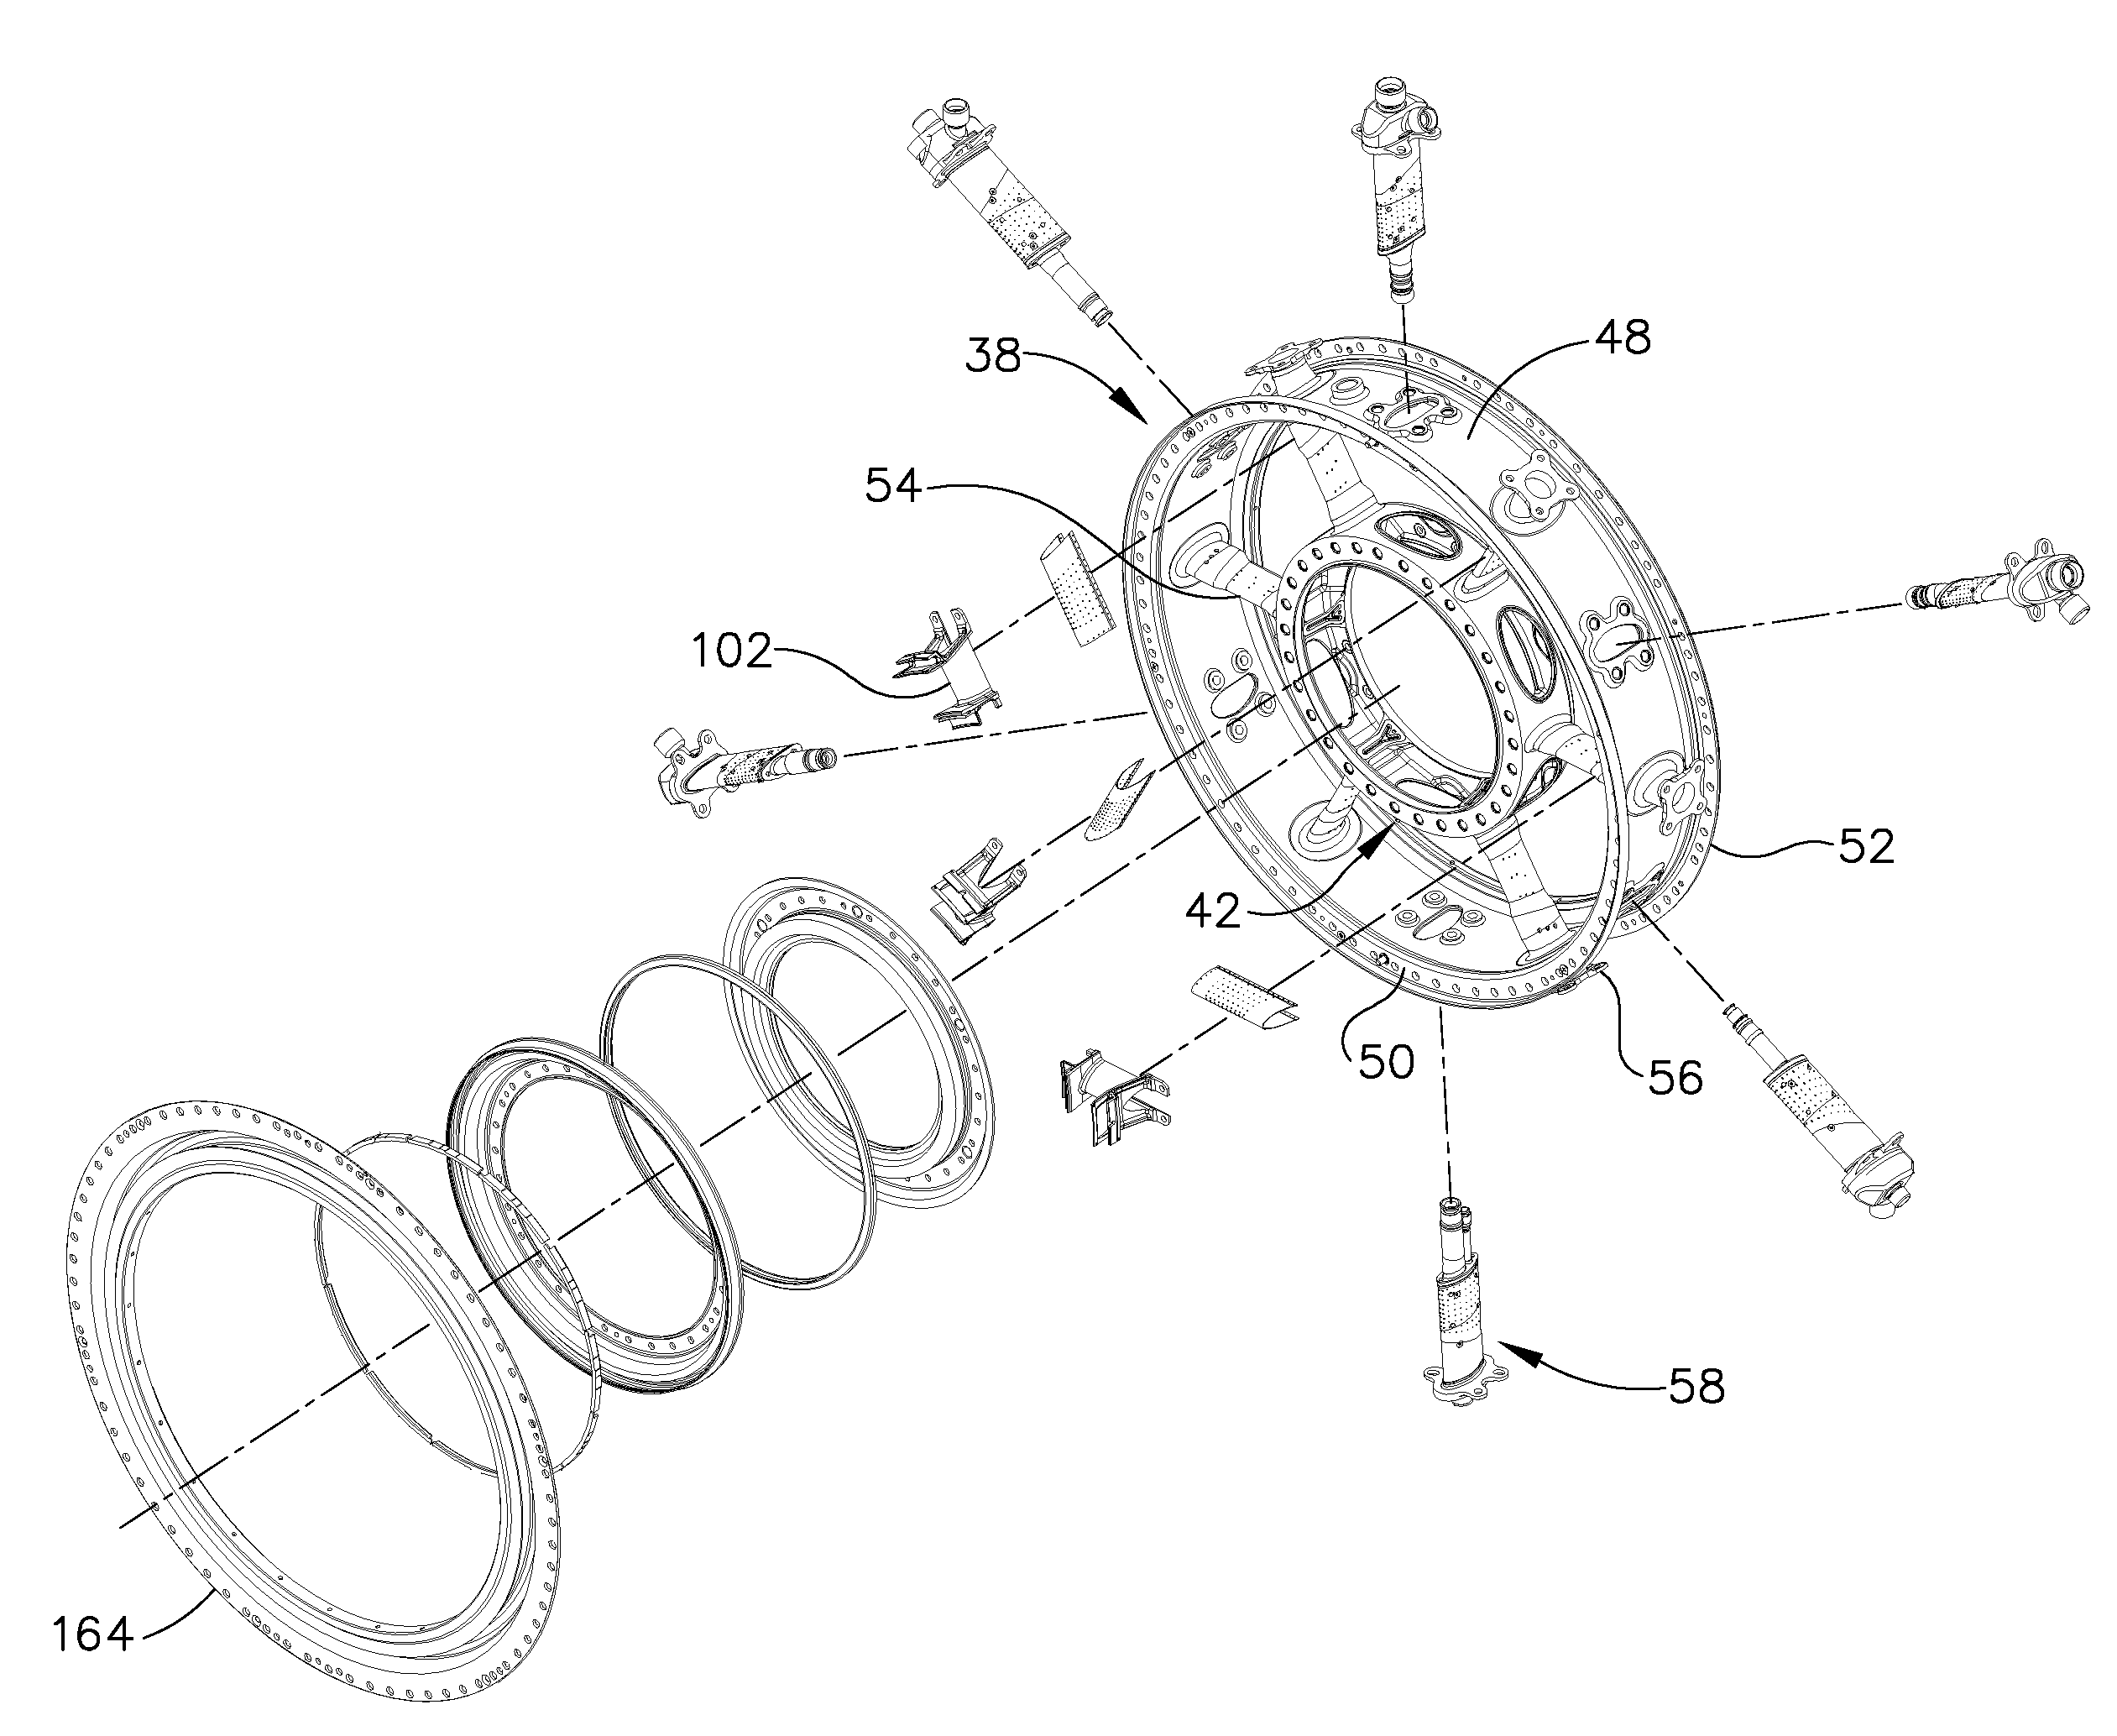 Integrated service tube and impingement baffle for a gas turbine engine